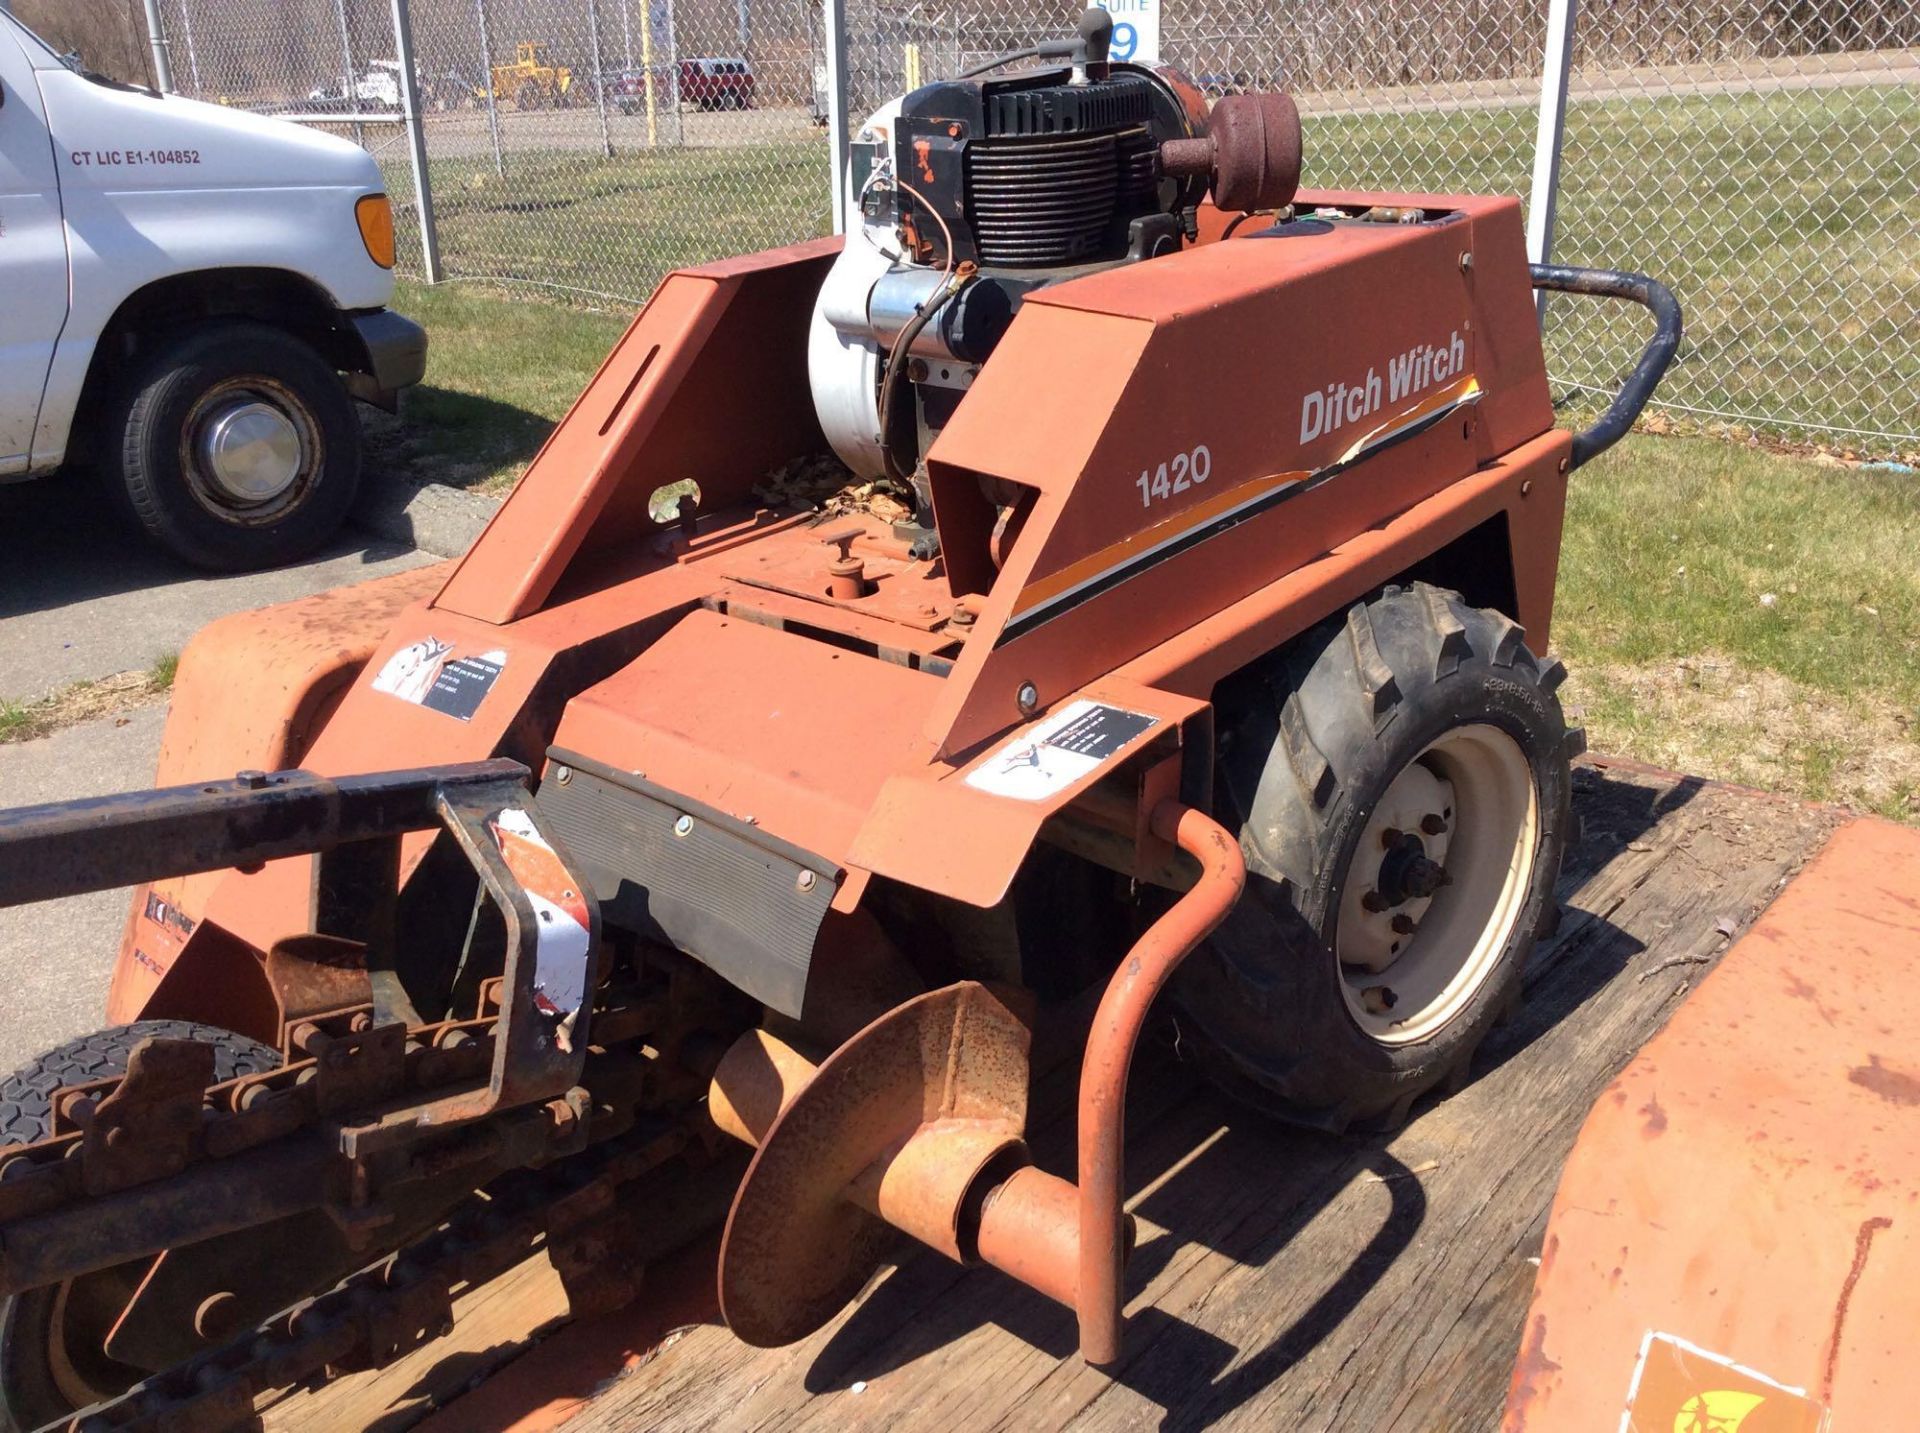 Ditch Witch m/n 1420 ditch digger w/Kohler gas engine s/n 5C1316 - includes Ditch Witch tag-along - Image 2 of 2